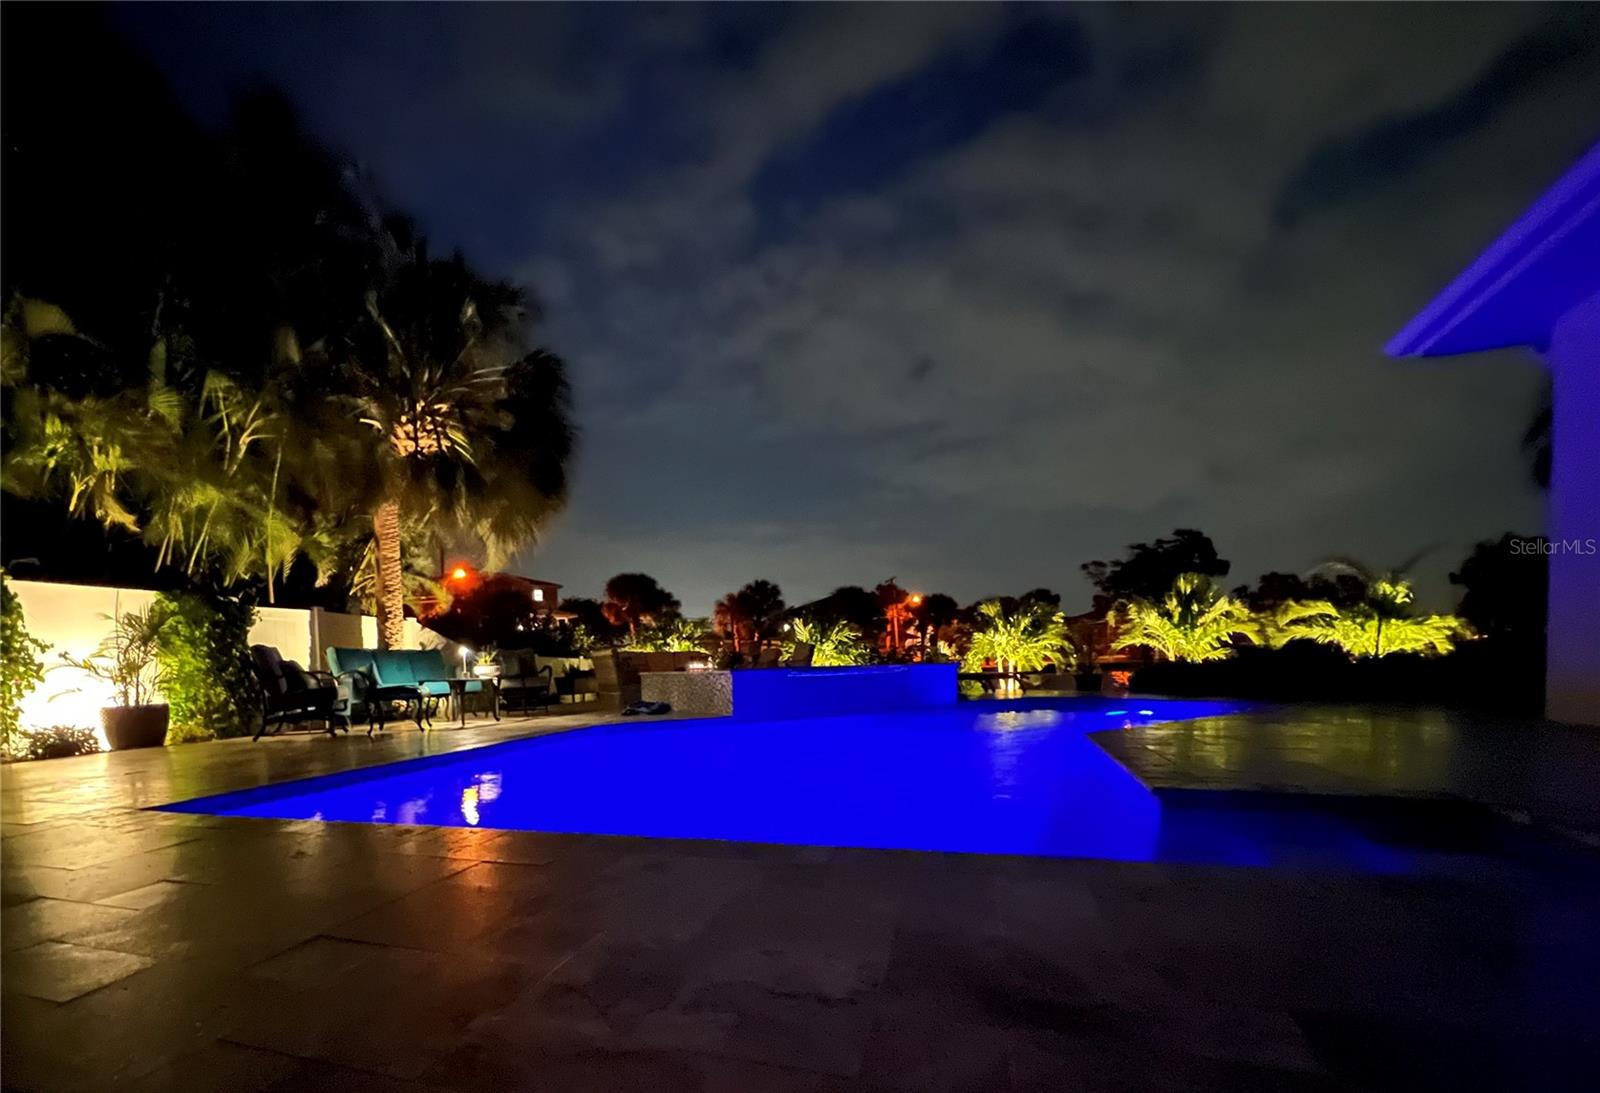 Programmable pool and landscape lighting adds a touch of glamor to your perfect Florida evenings!